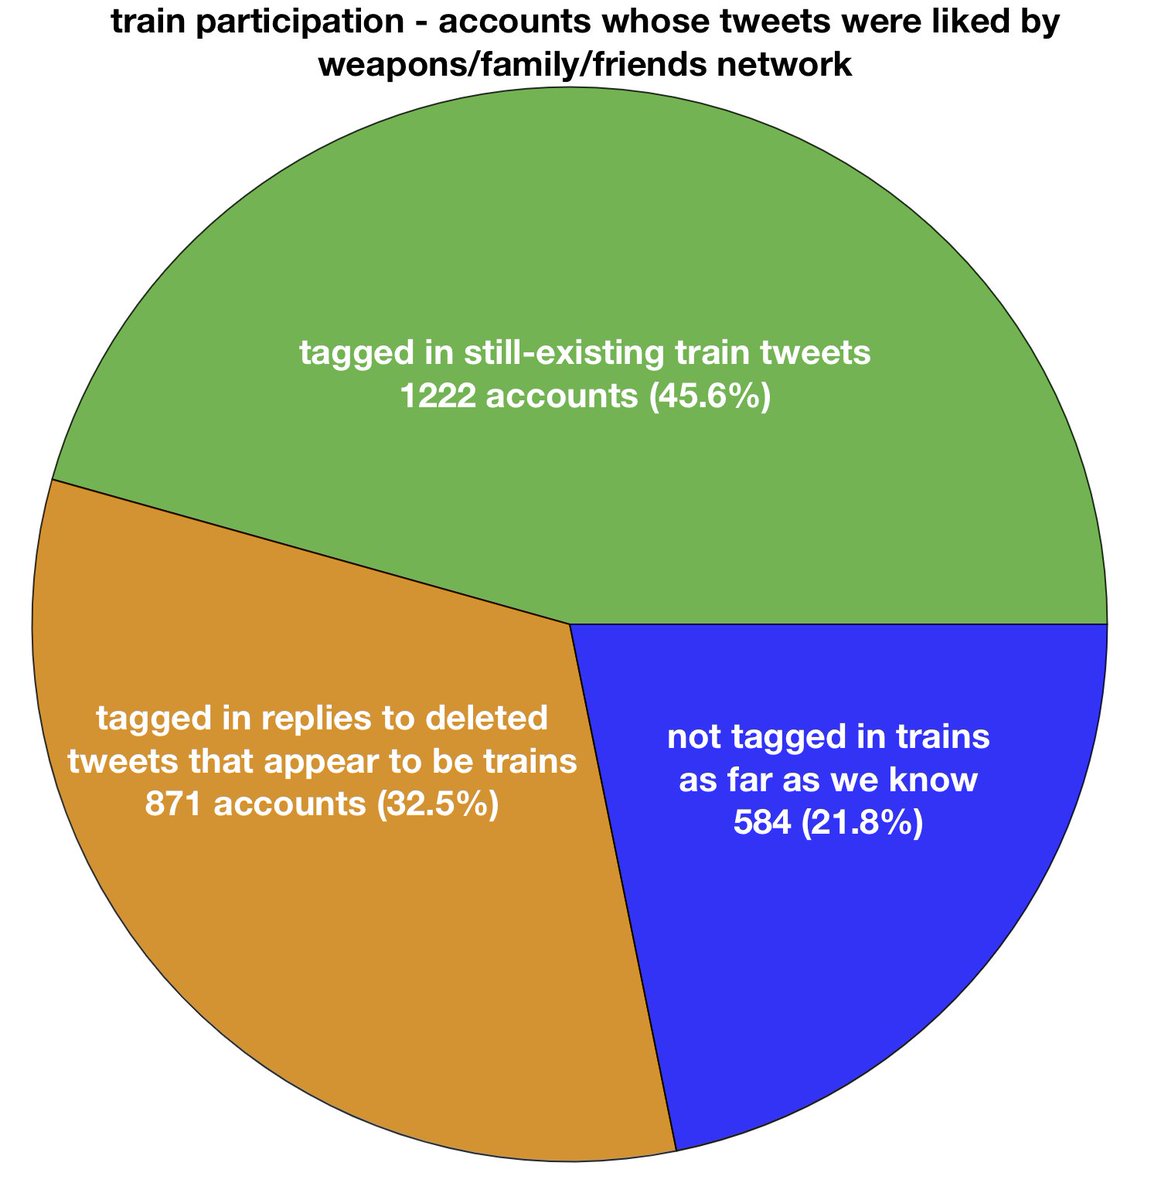 The answer appears to be  #MAGA trains: 2093 of 2267 accounts (78%) whose tweets were liked by the family/friends/weapons accounts were either listed in train tweets or tagged in replies to removed tweets that were likely trains (lots of tags, replies like "ty for ride" or "IFB".)